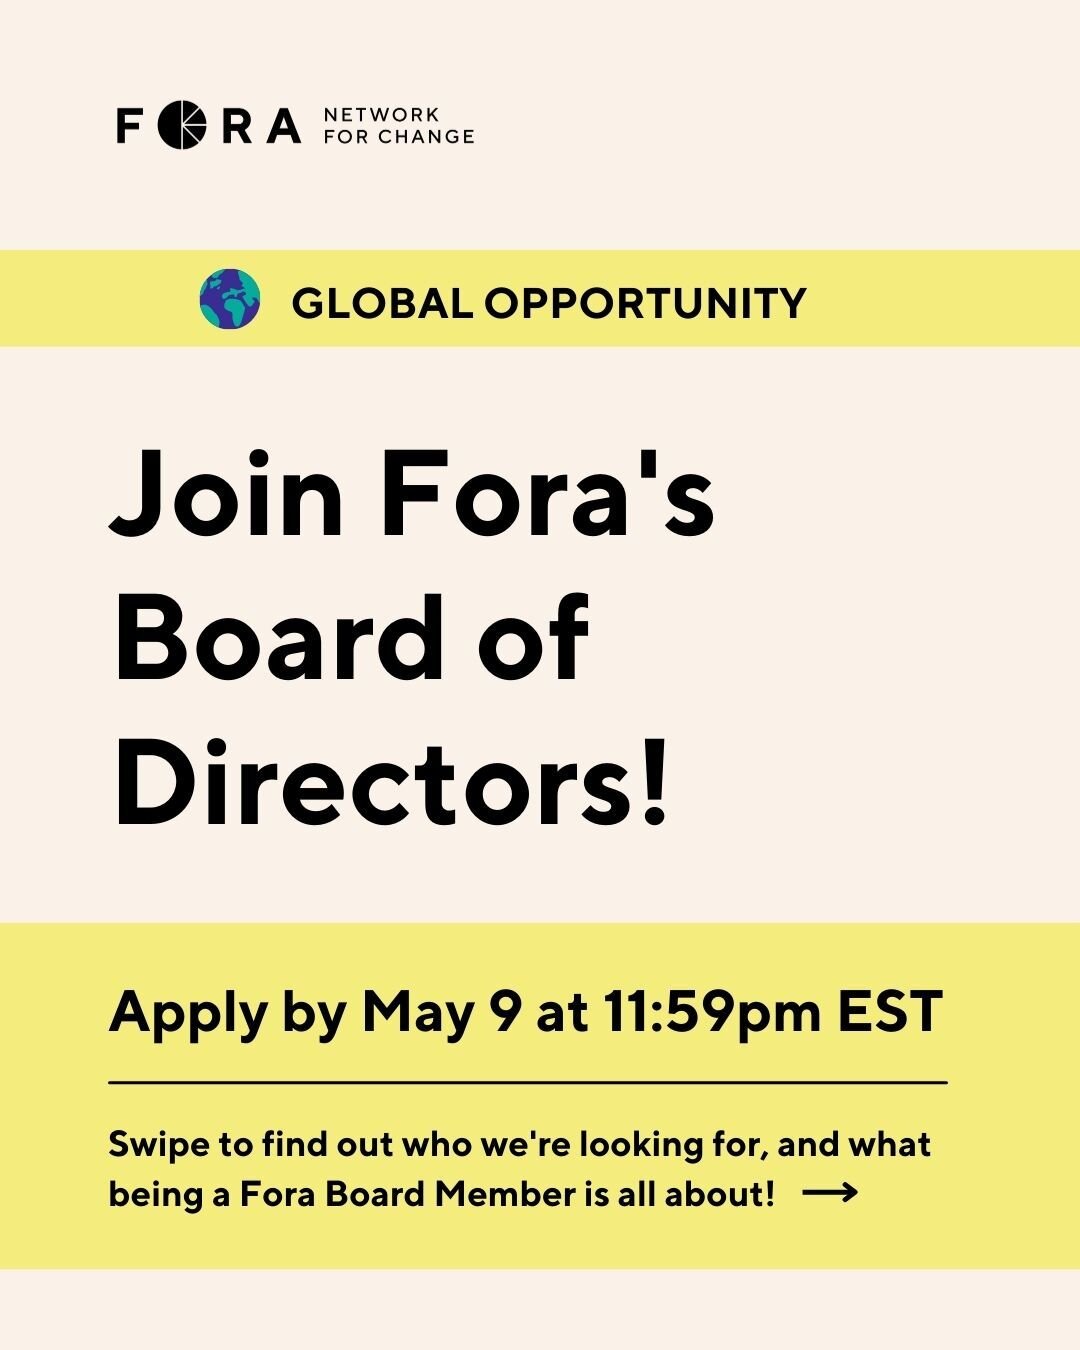 Take your leadership to the next level by applying to join our Board today! 

Fora's Board of Directors play an essential role in our organization. This group of exceptional and passionate individuals help guide our work towards building a more gende